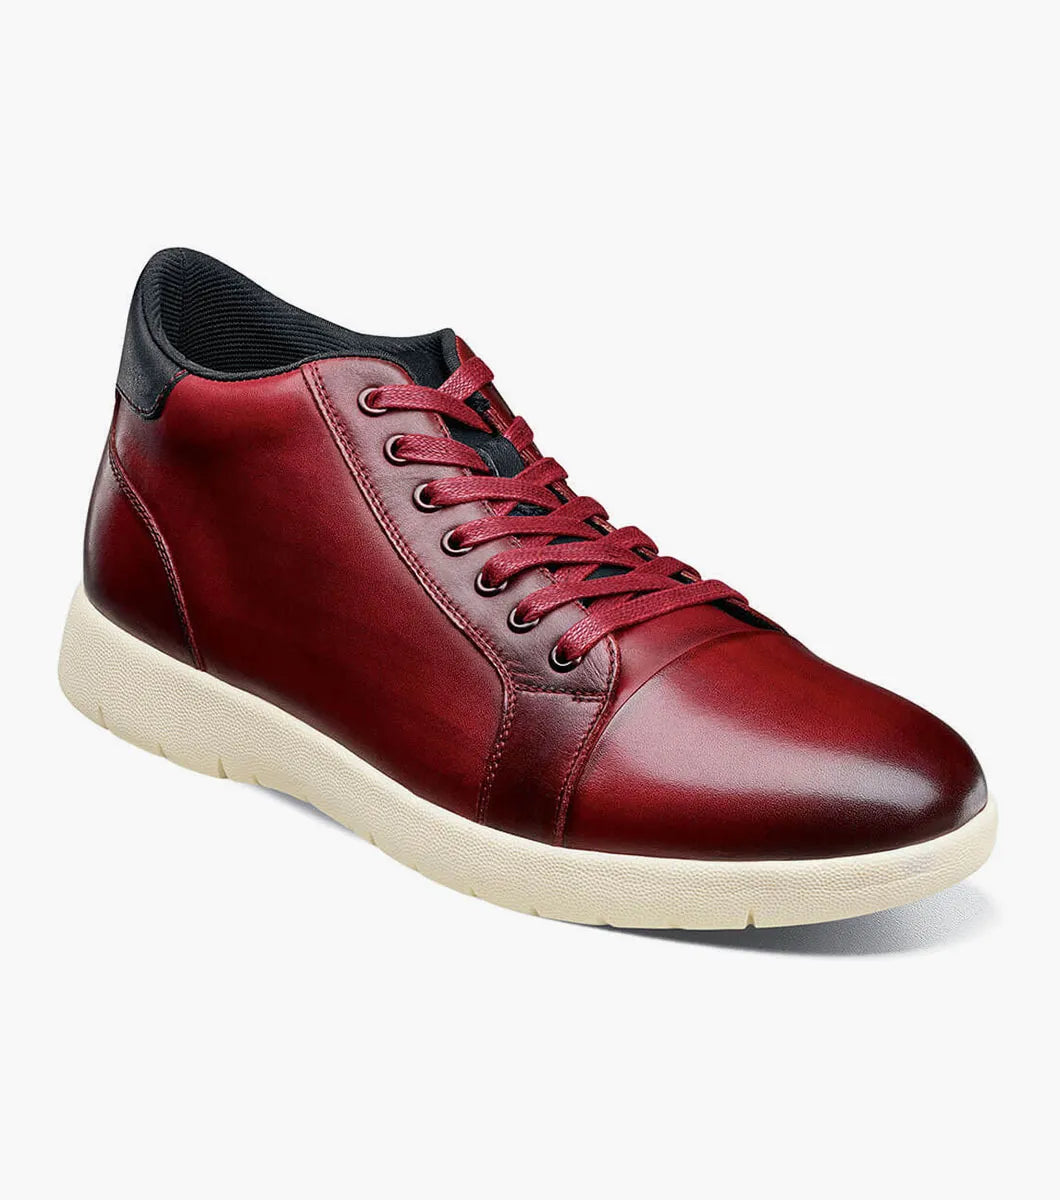 STACY ADAMS Men's Harlow Cap Toe Mid Lace-up Indonesia | Ubuy